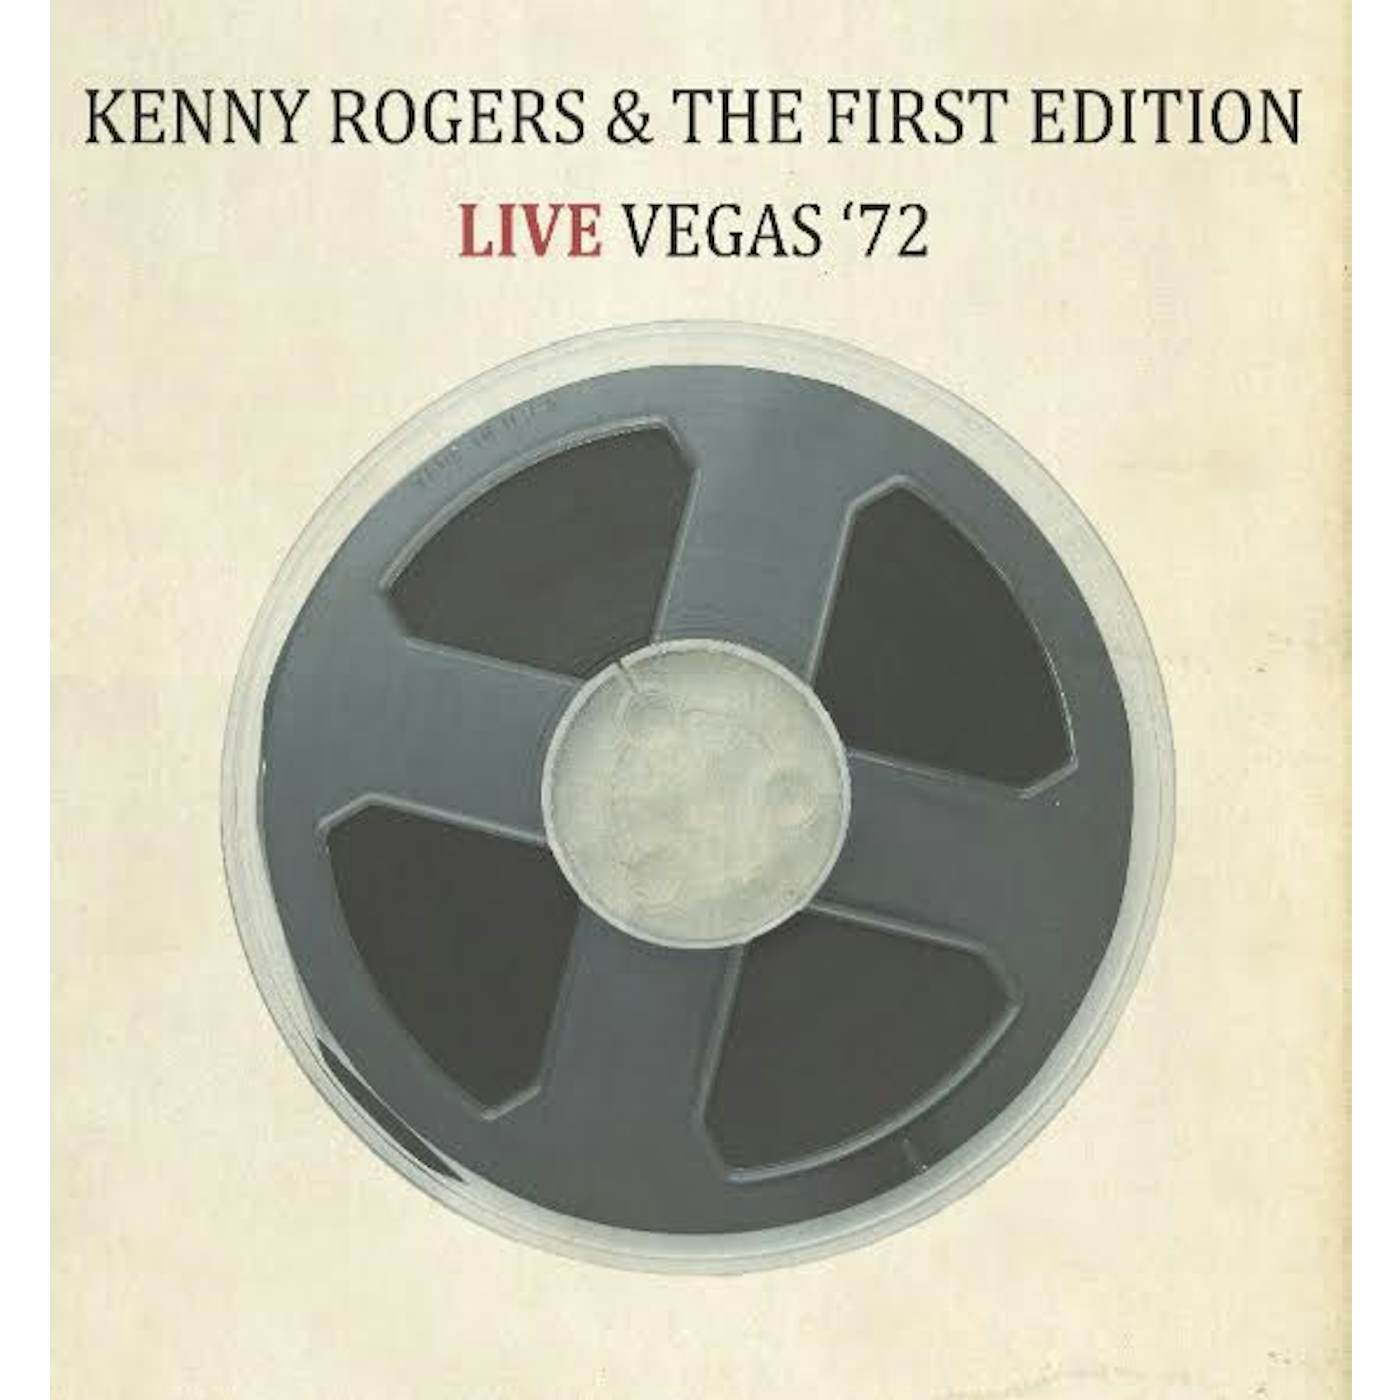 Kenny Rogers & The First Edition LIVE VEGAS 72 Vinyl Record